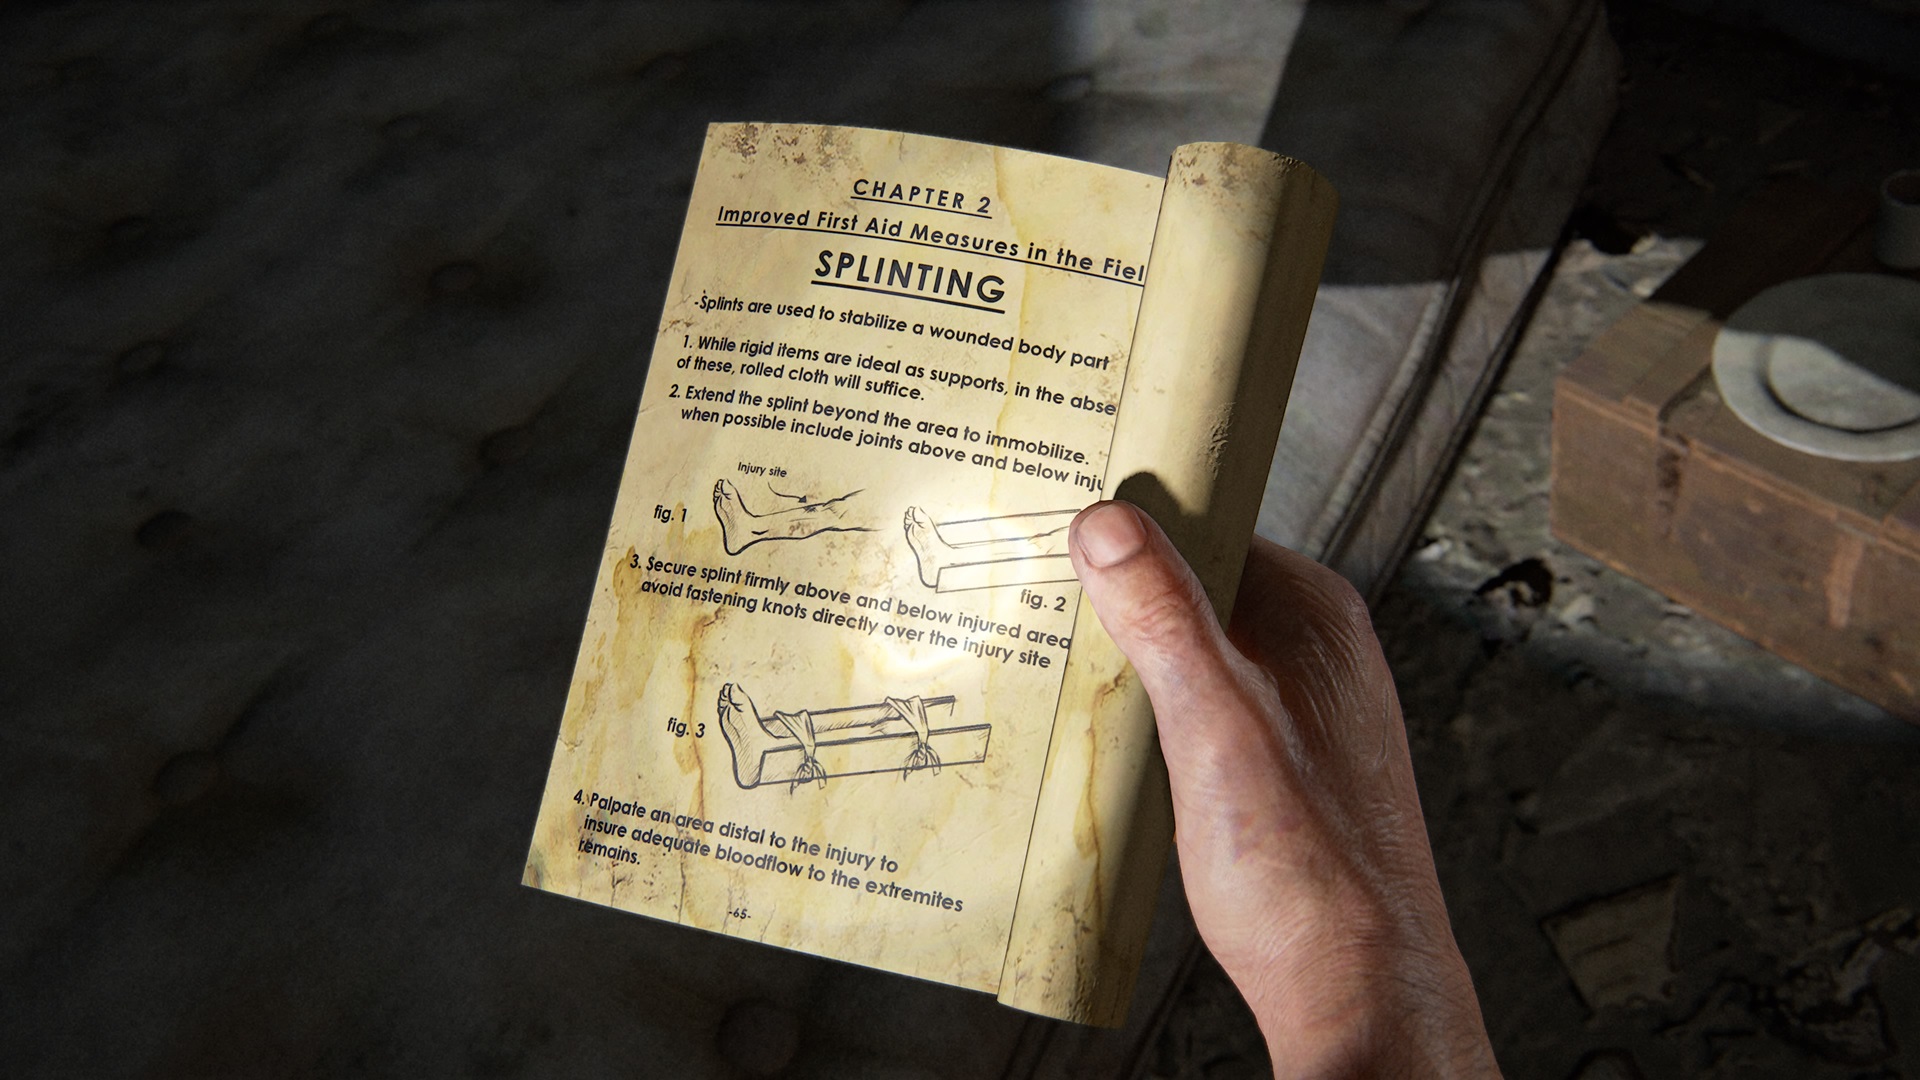 The Last of Us Part 1 Training Manuals locations